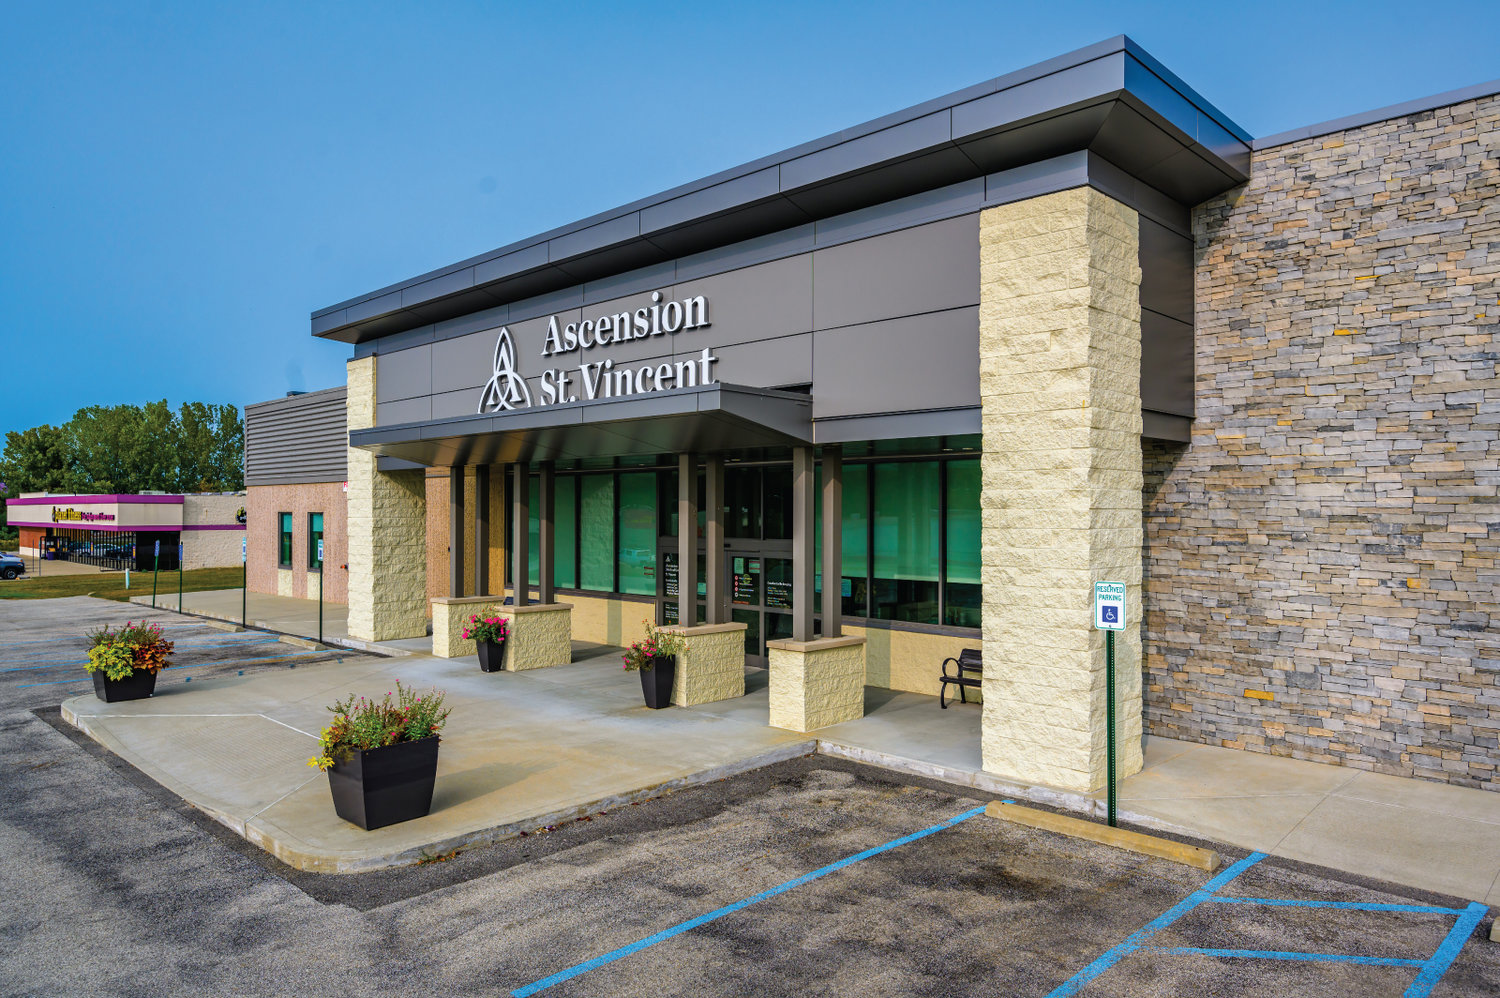 Ascension Medical Group announced the closure of 11 walk-in clinics Thursday, including the Crawfordsville site on Bush Lane. Walk-in primary care services have ceased, but will providers will continue to offer family medicine, cardiology, radiology and physical therapy.